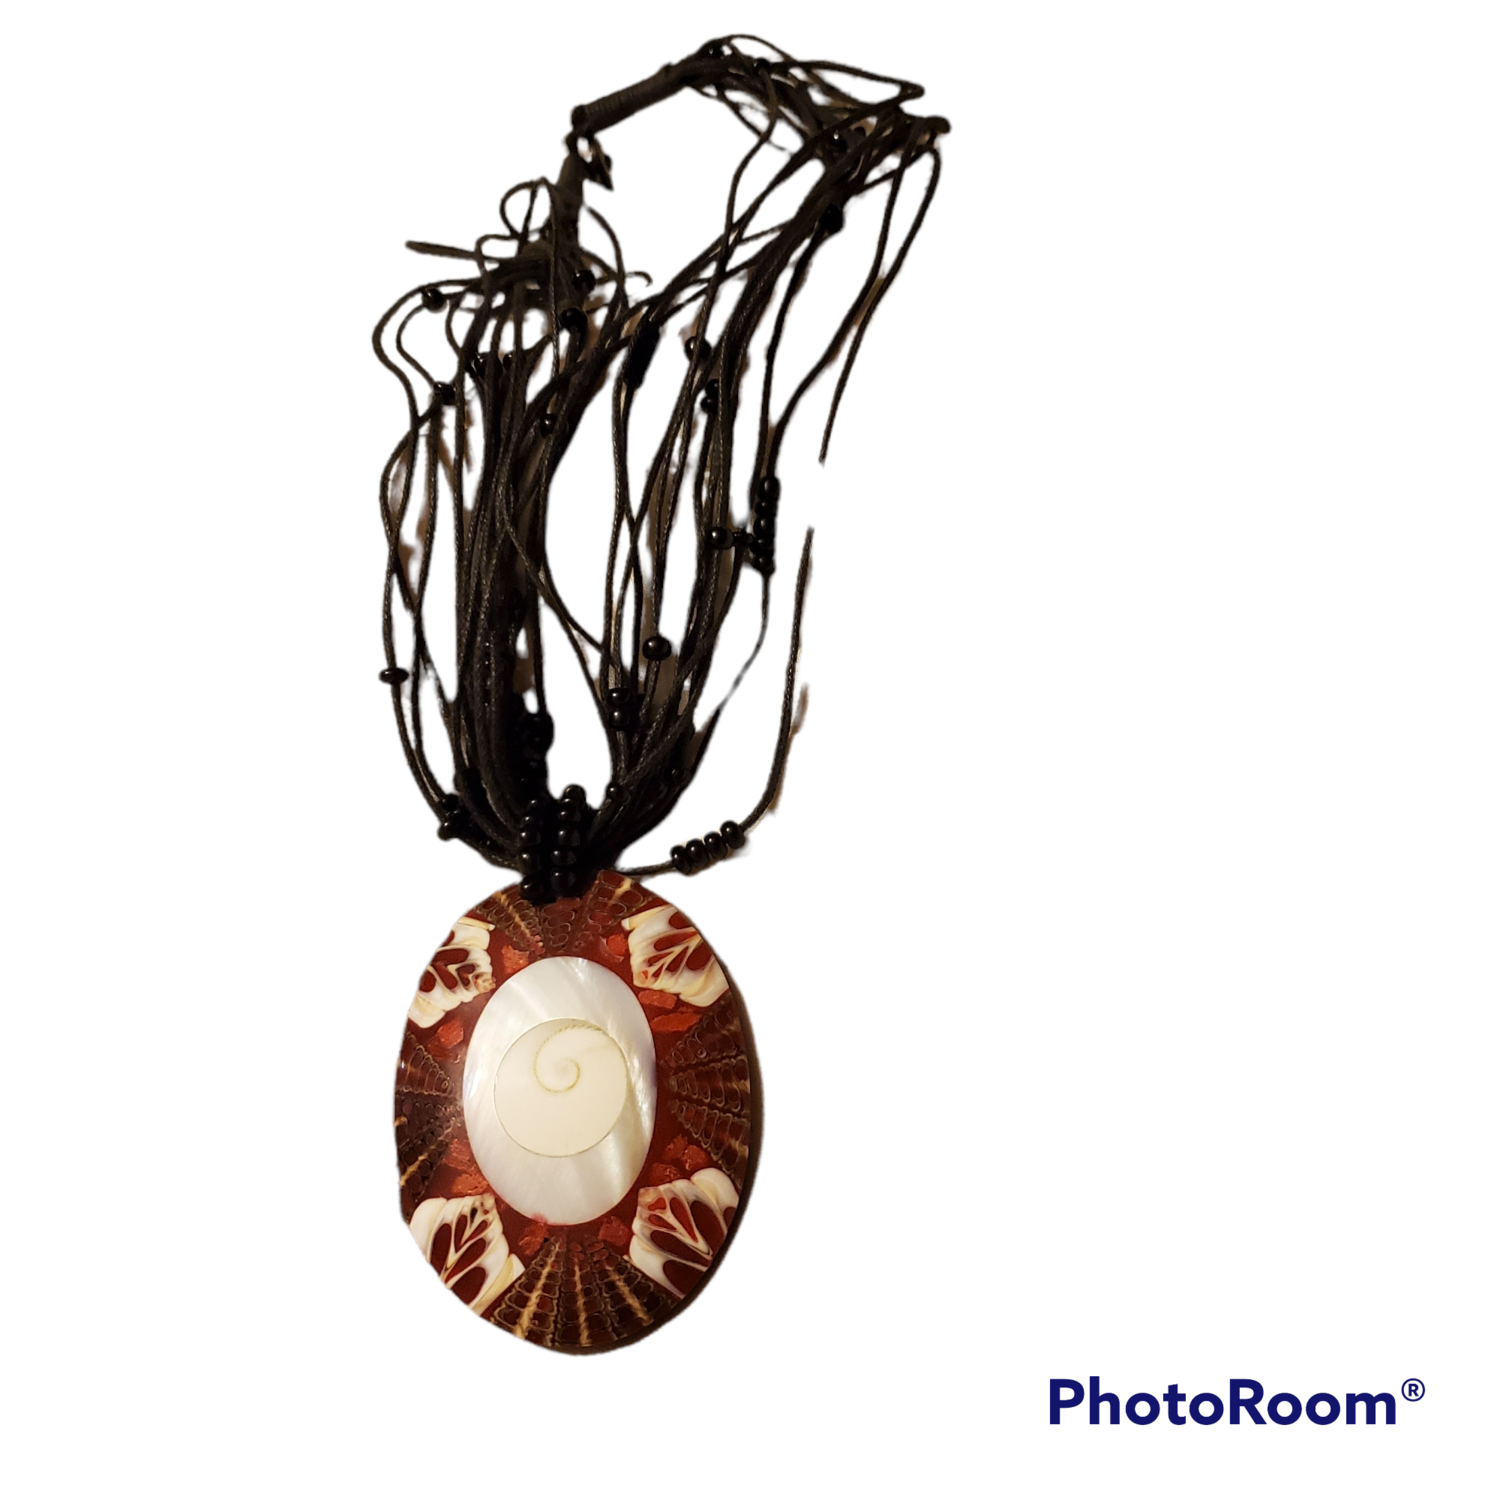 SAJEN Indonesia Genuine Abalone Hand Crafted Necklace